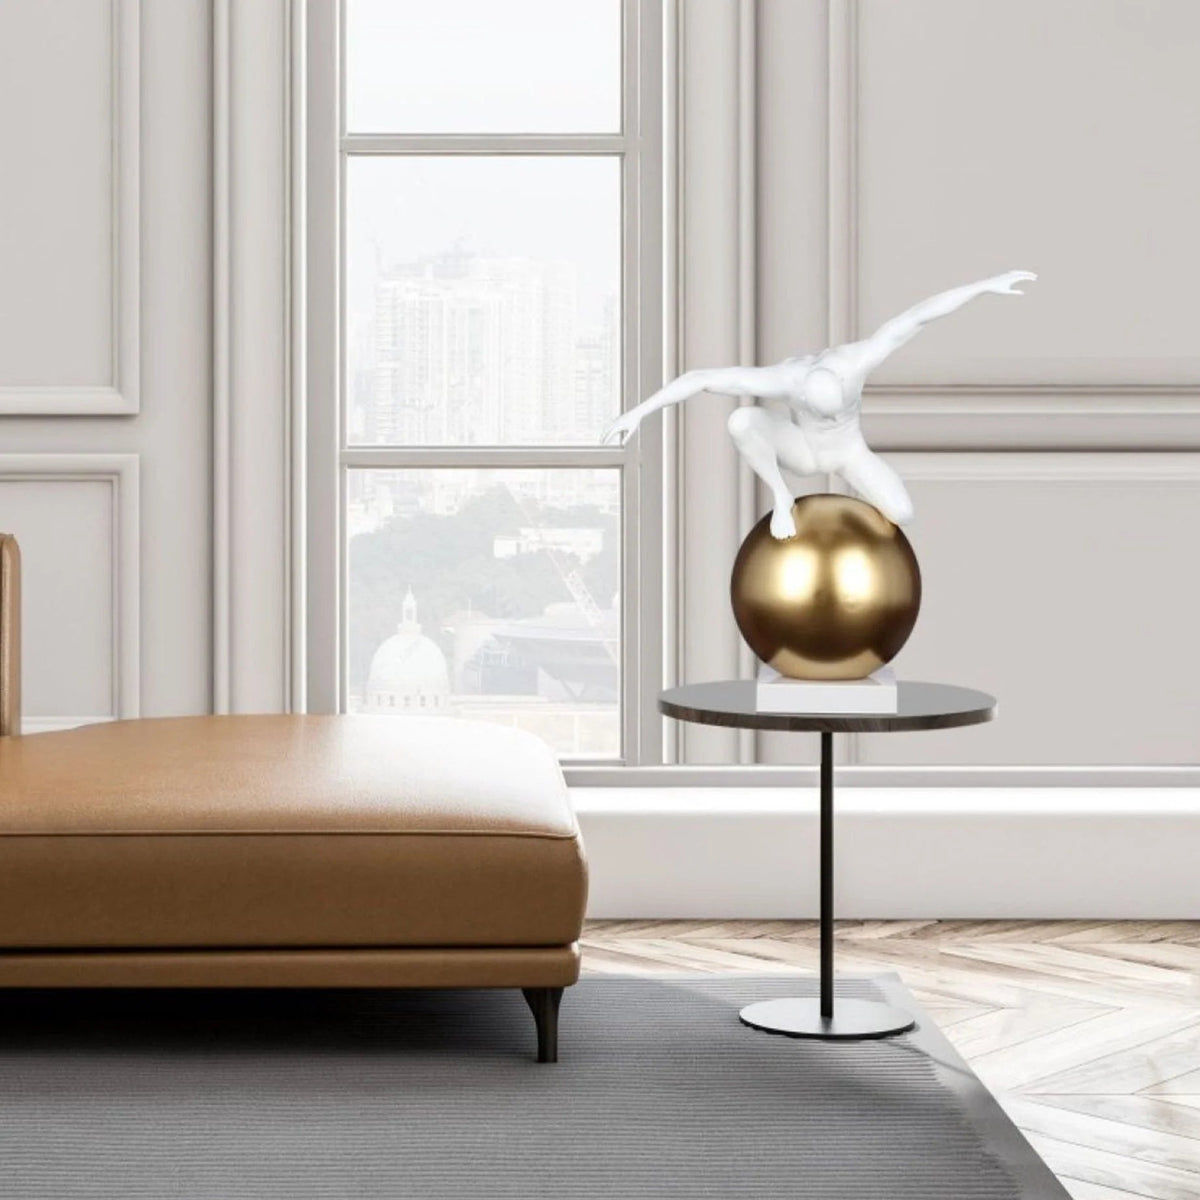 Equilibrium Structure / Matte White & Gold / Man on Sphere / Home Decor